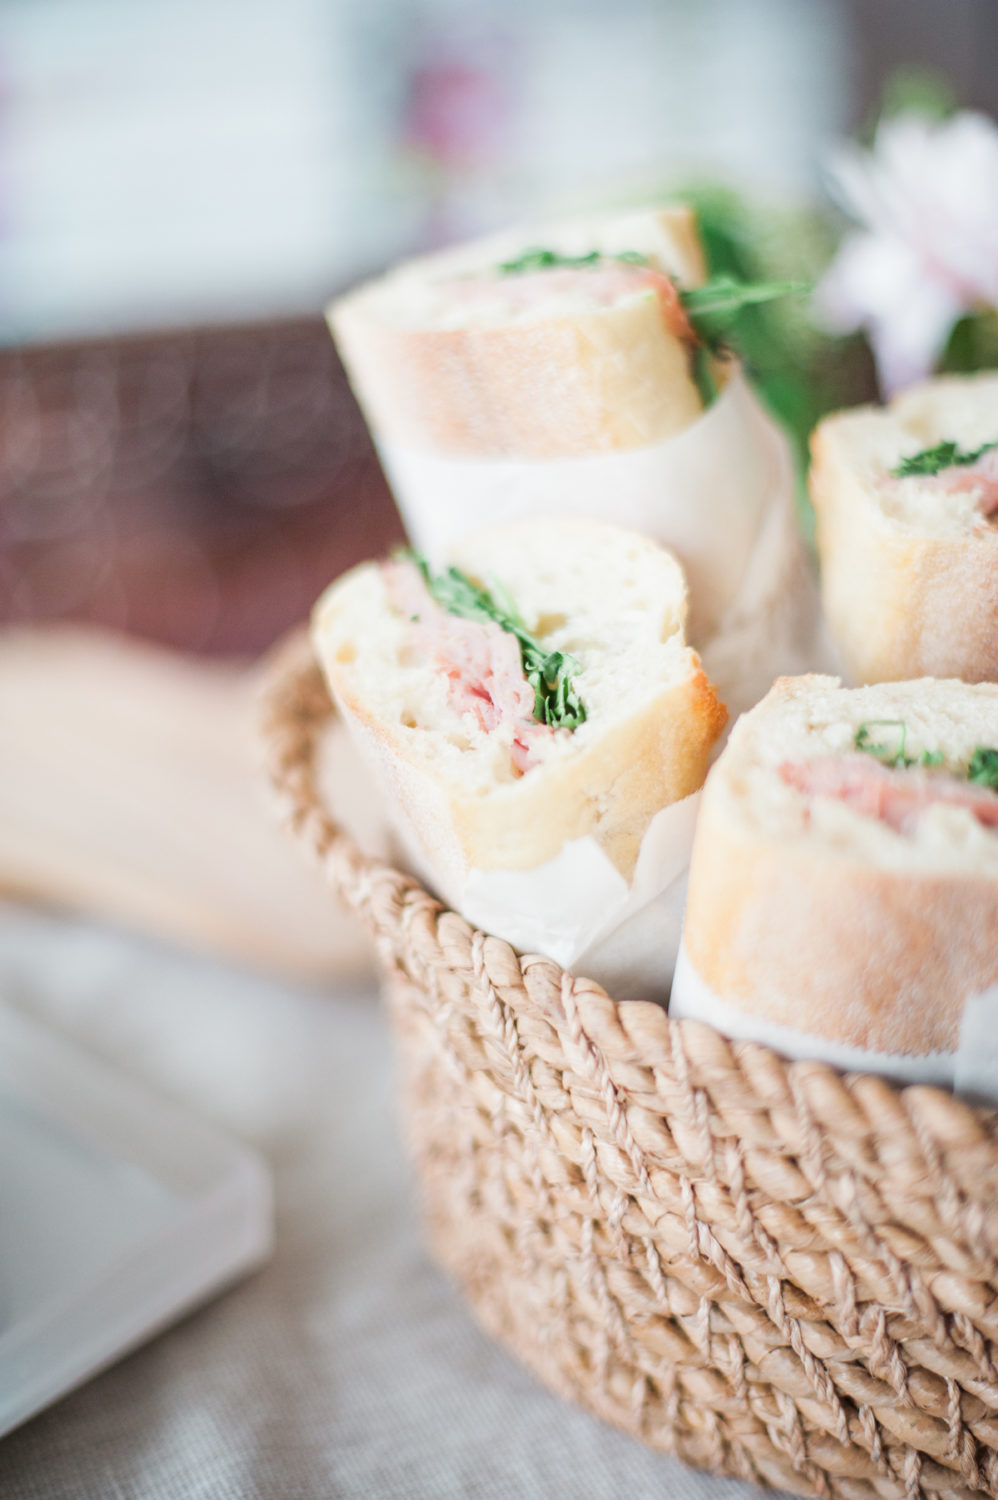 Sandwiches wrapped in parchment and twine